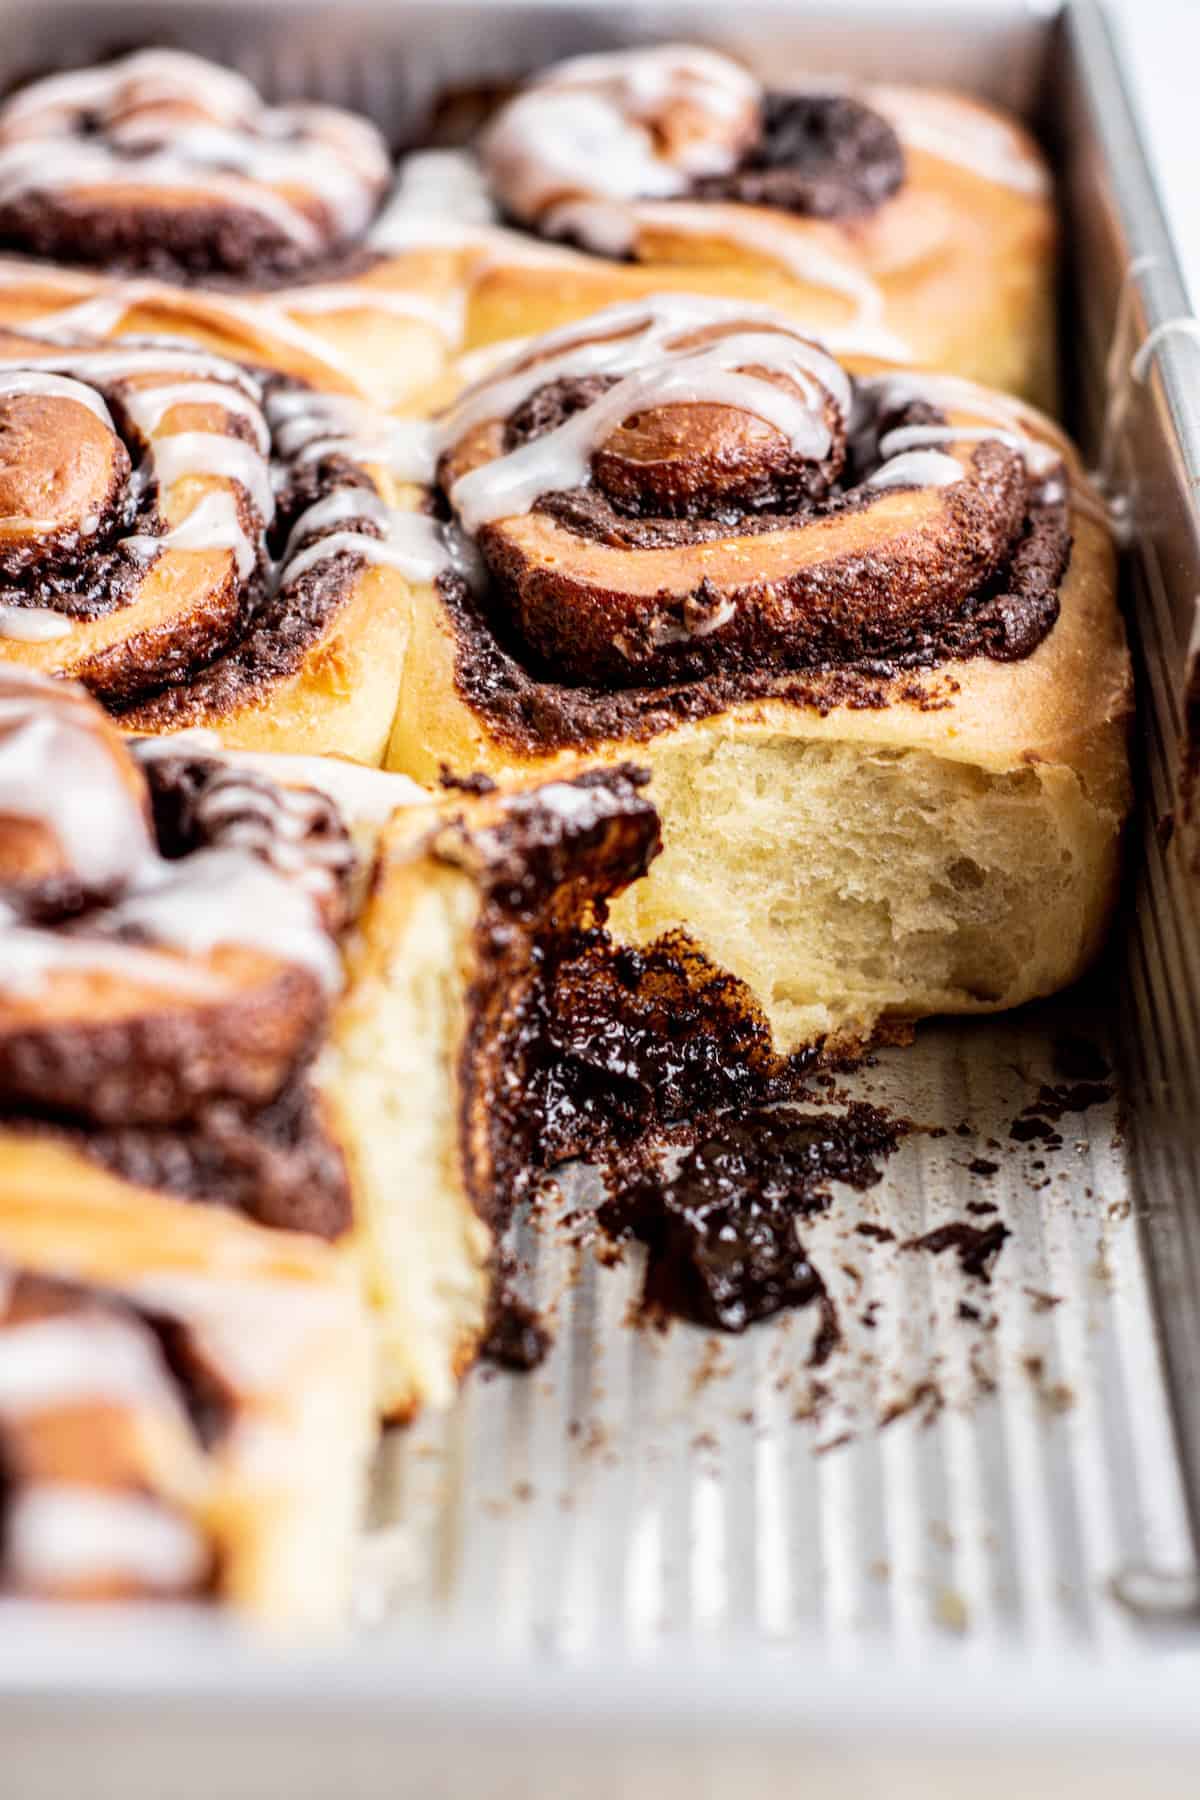 Close-up of fluffy chocolate cinnamon rolls in a baking tray with one missing.